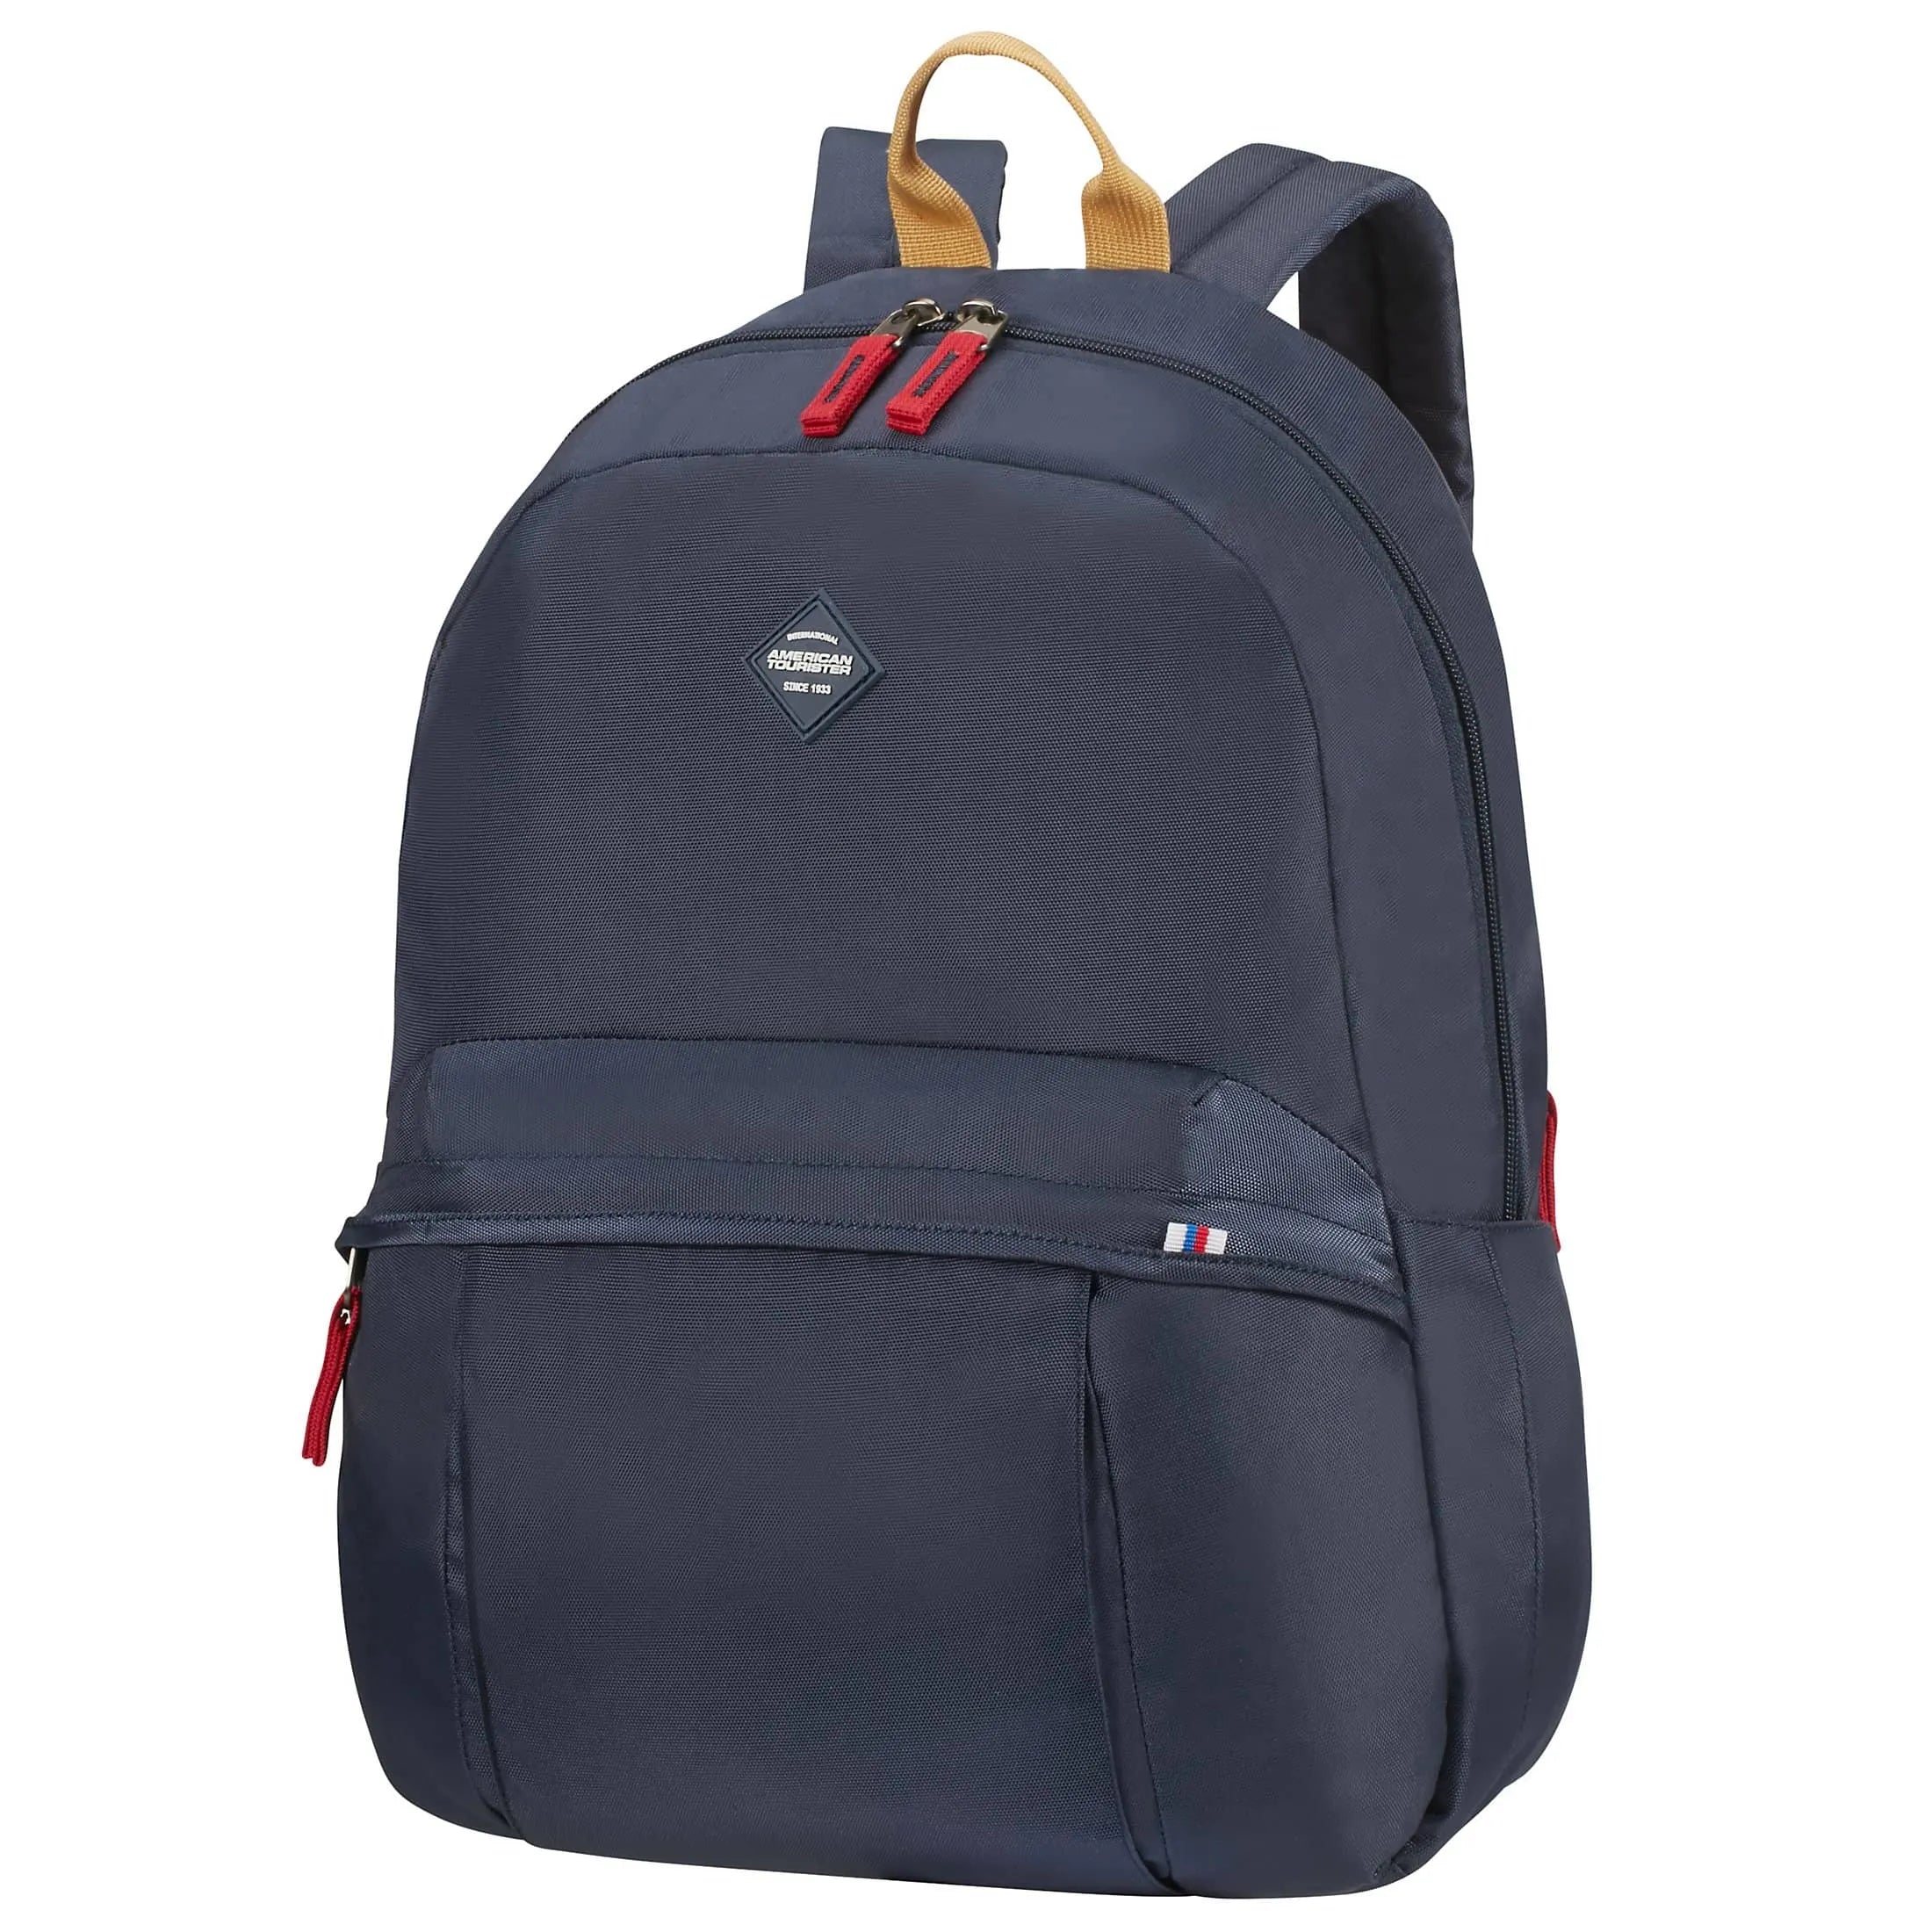 American Tourister Upbeat Backpack 42 cm - navy